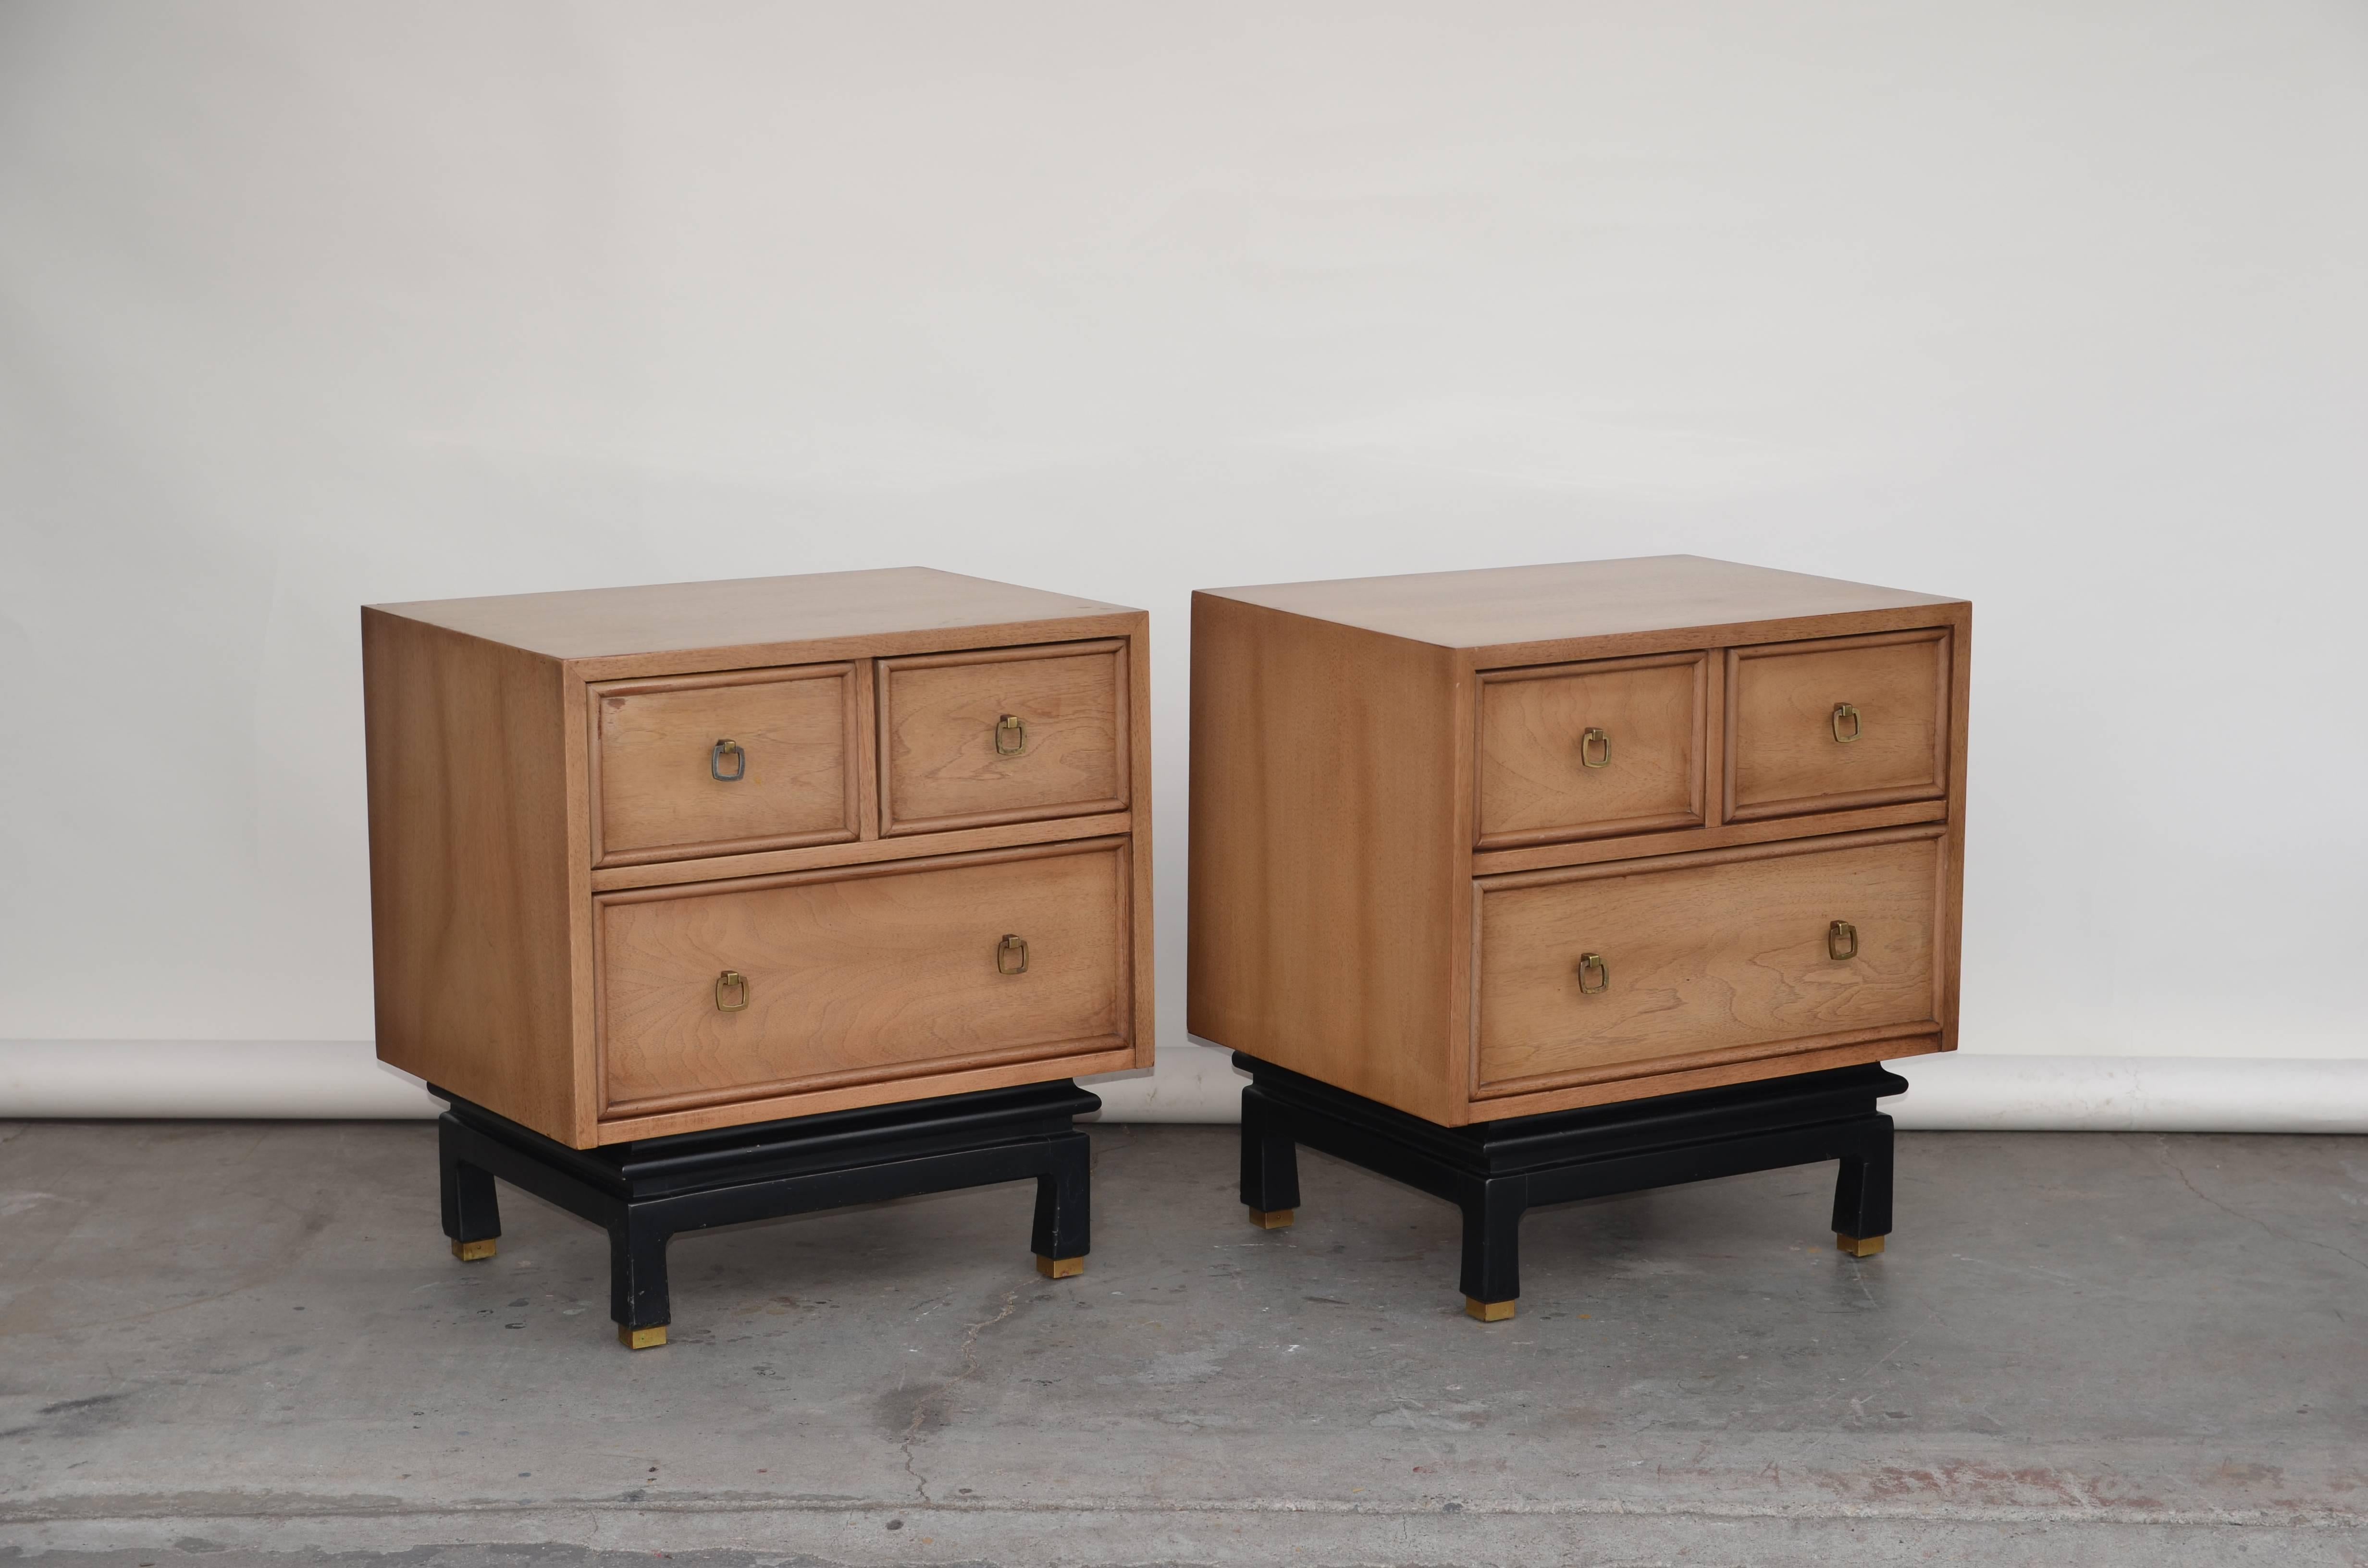 Pair of bleached oak nightstands by American of Martinsville. Ebonized base and patinated brass hardware and accents. Stamped.